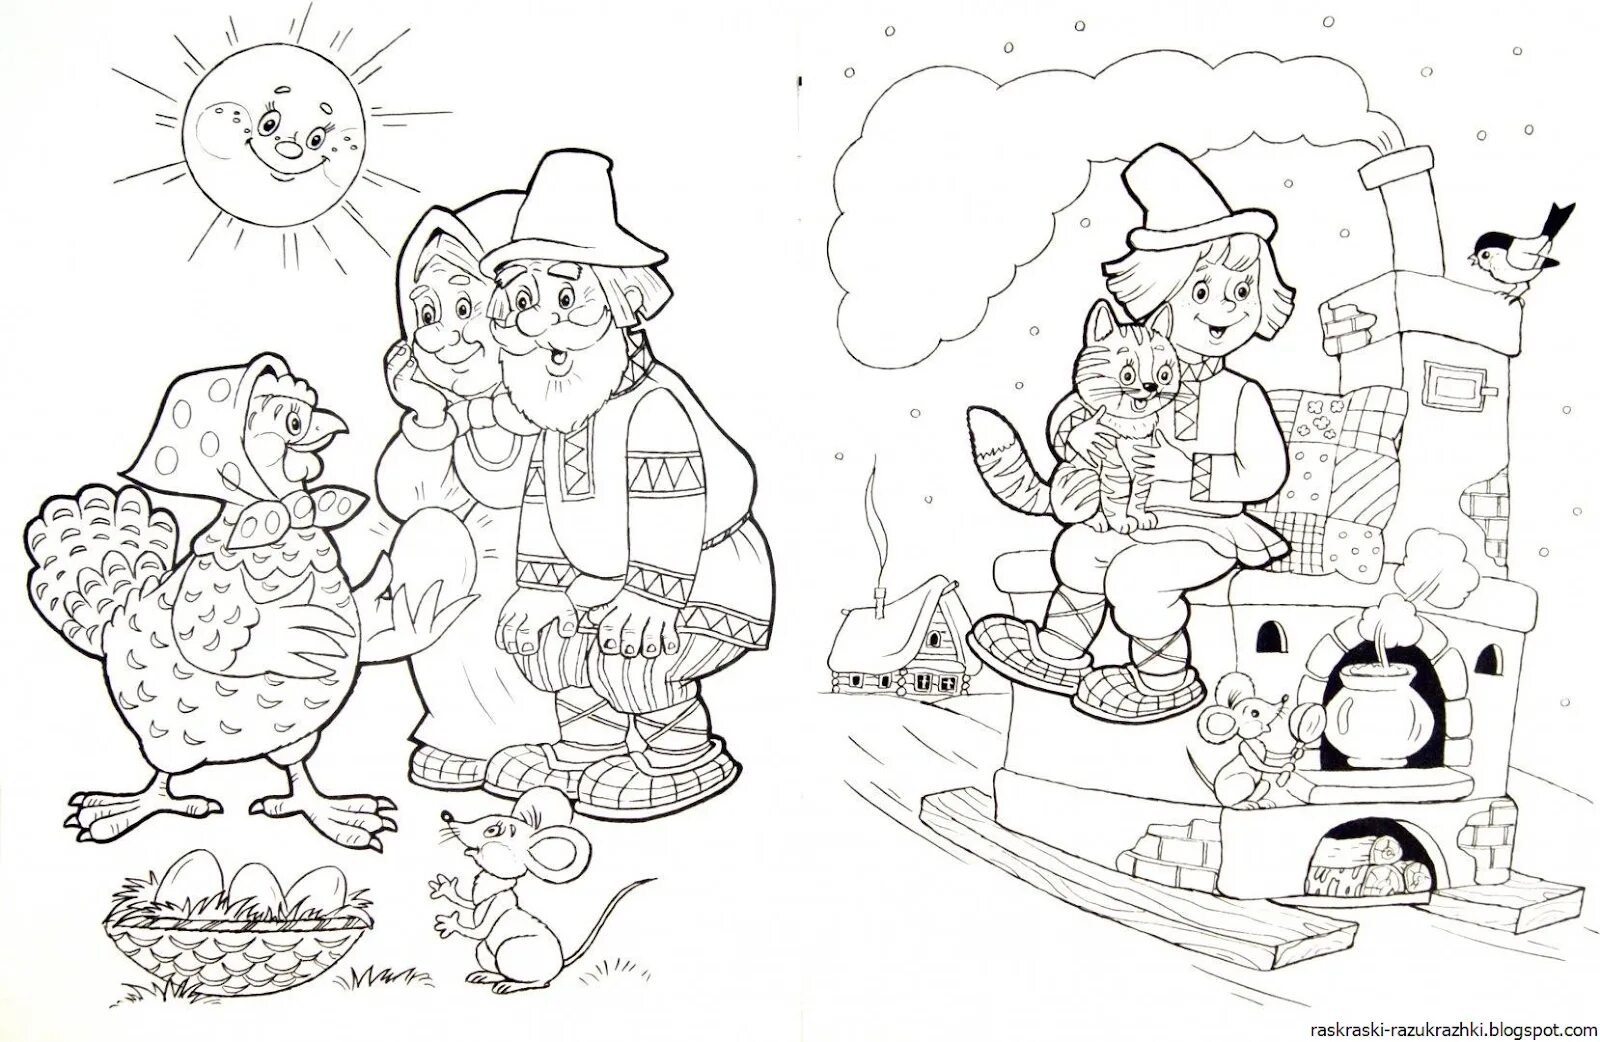 Joyful coloring book based on Russian fairy tales for children